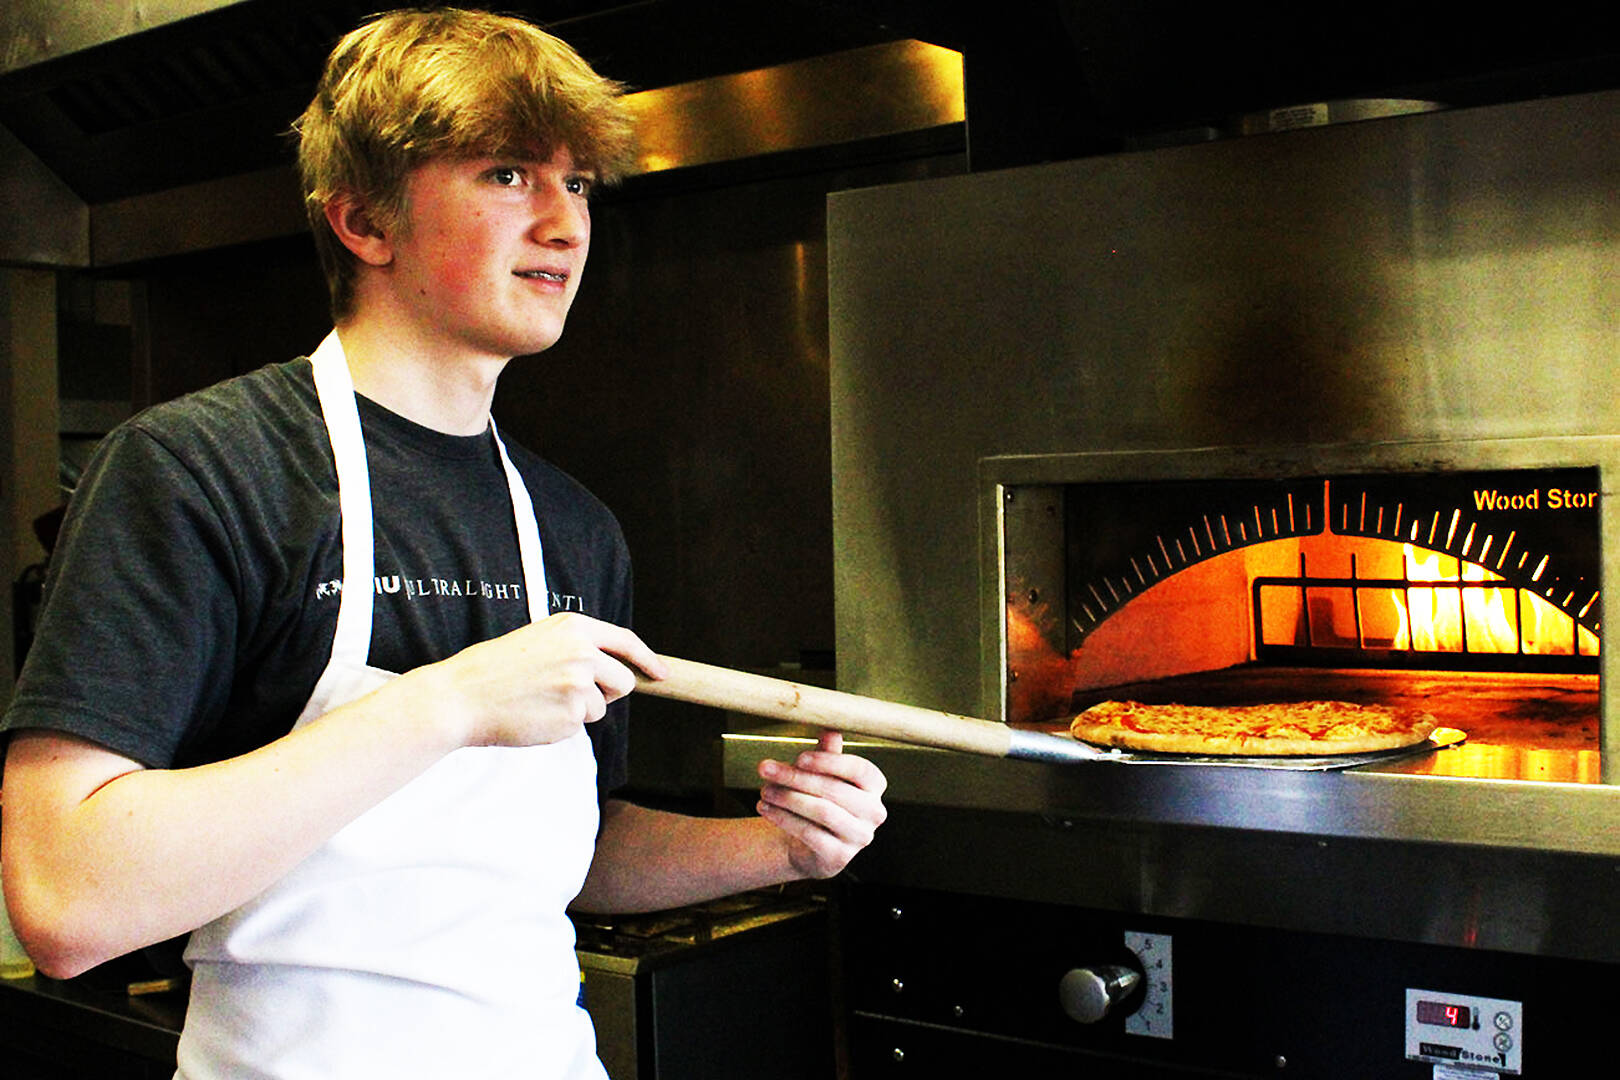 Madison Stevens courtesy photo
Student Grady Smallbeck takes a pizza out of the oven at The Odin Inn.